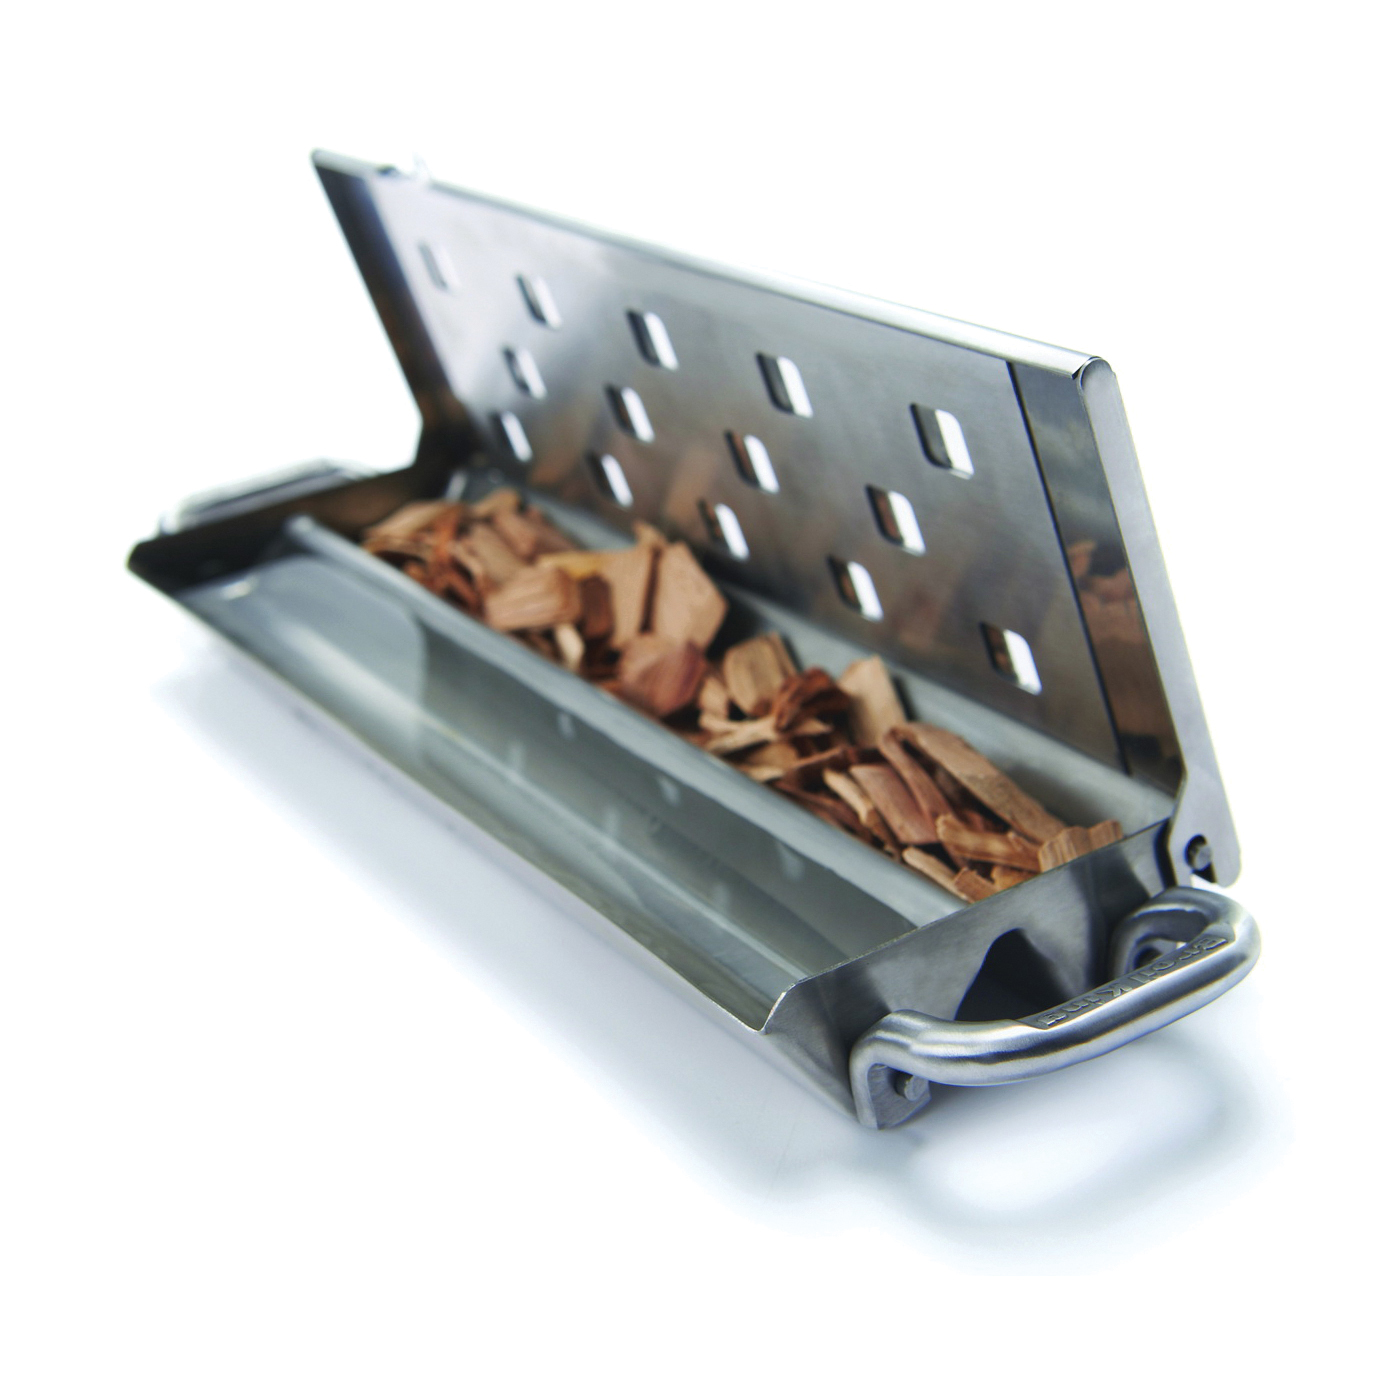 Imperial 60190 Smoker Box with Slider Lid, Stainless Steel